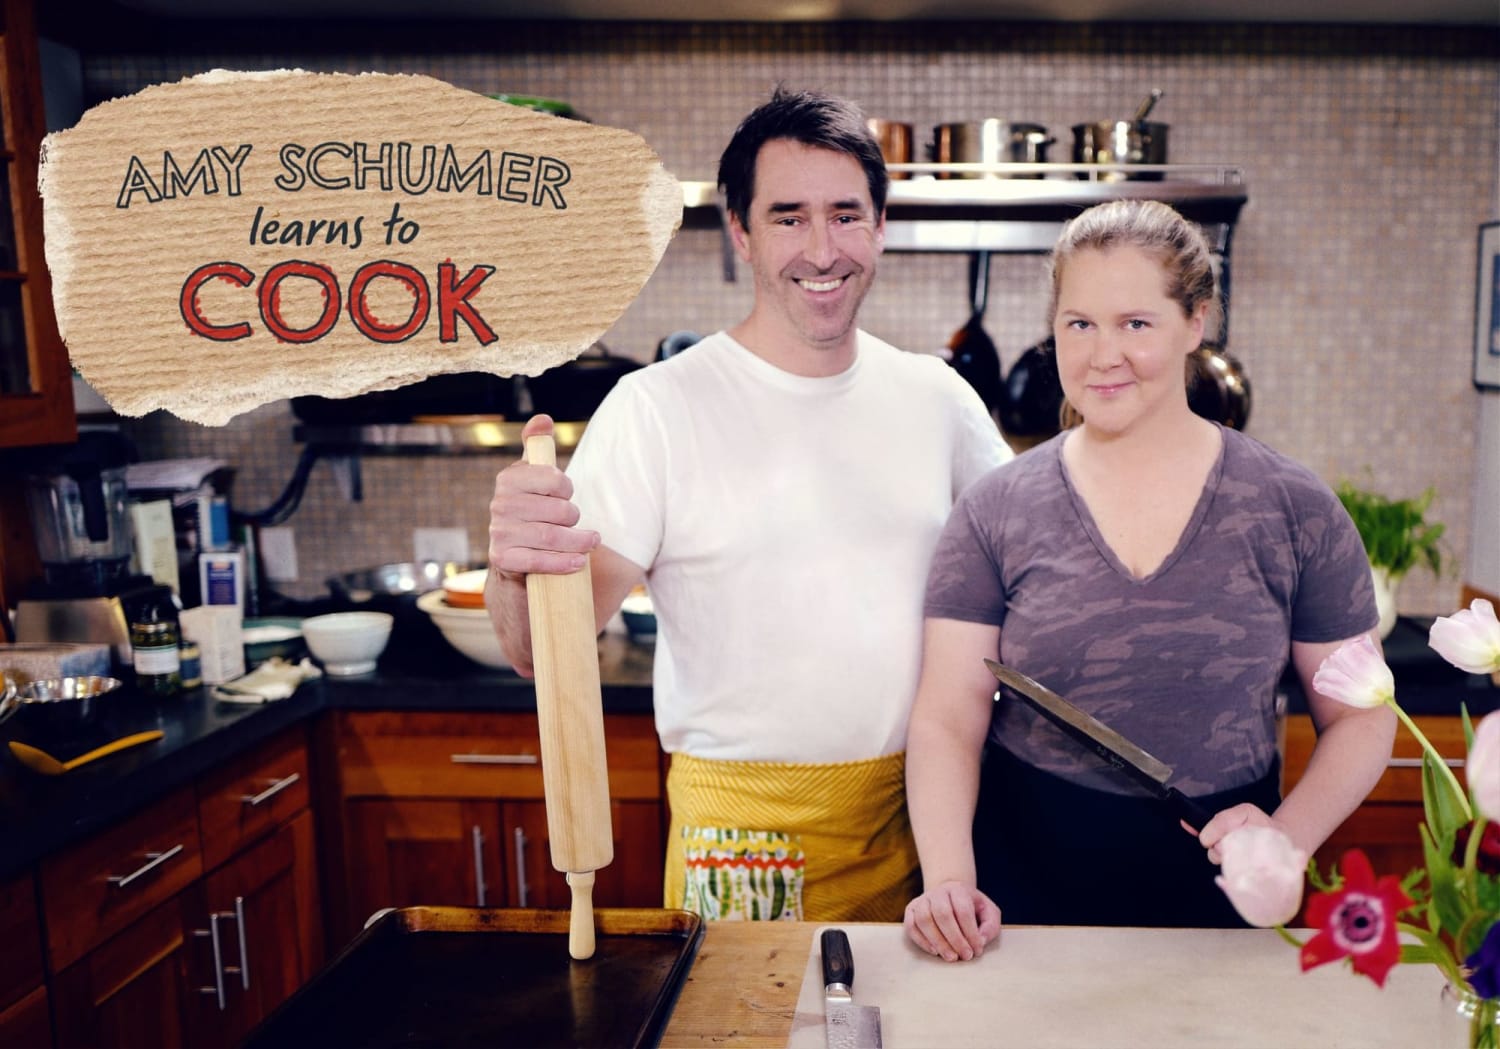 Amy Schumer Learns to Cook makes you feel more confident in the kitchen